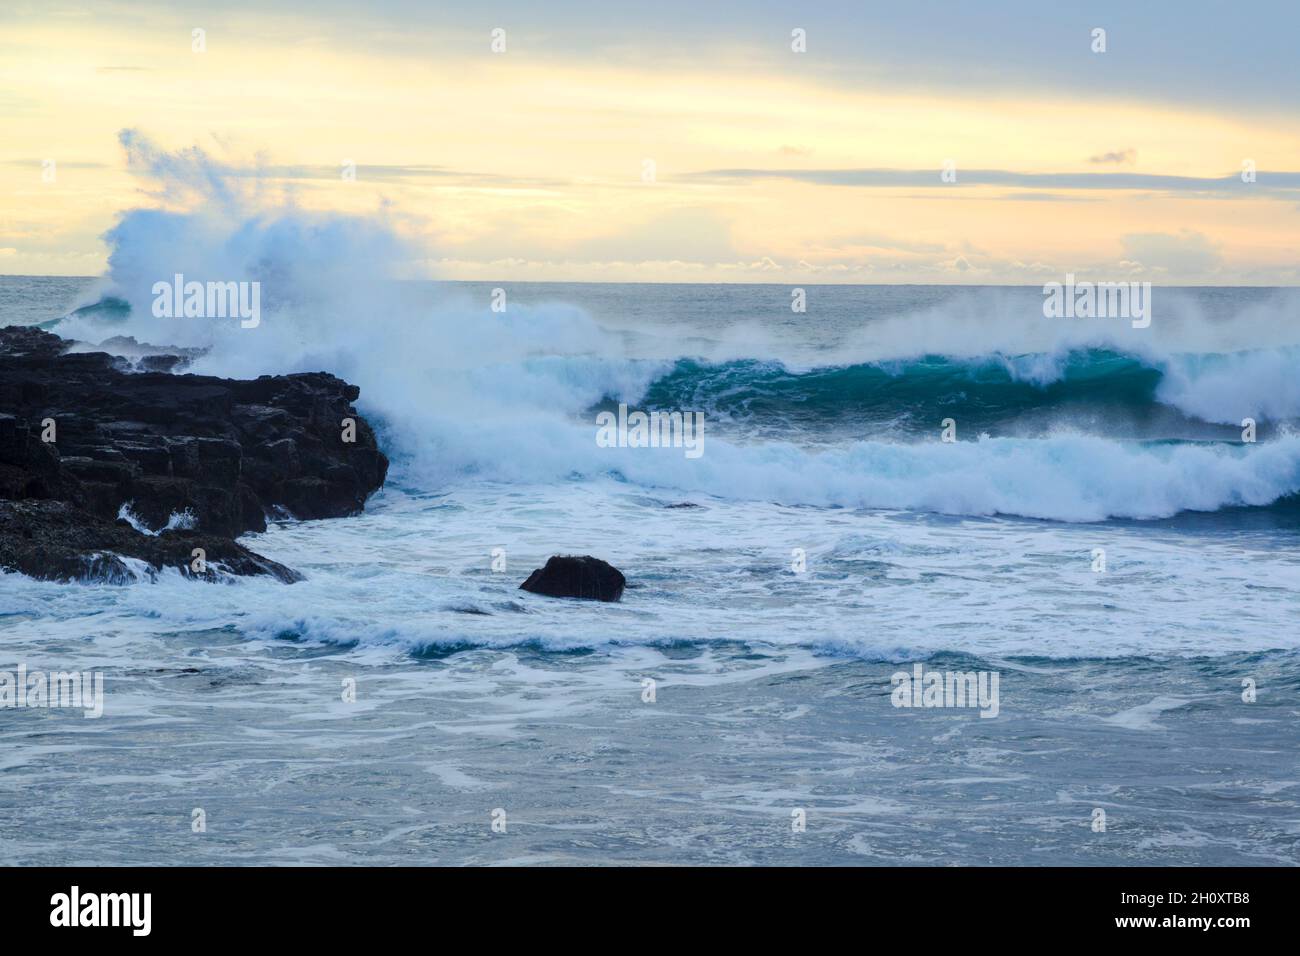 Energetic waves crashing against volcanic rocks at dusk at Londranagar on the Snæfellsnesnes peninsula in the Western part of Iceland Stock Photo